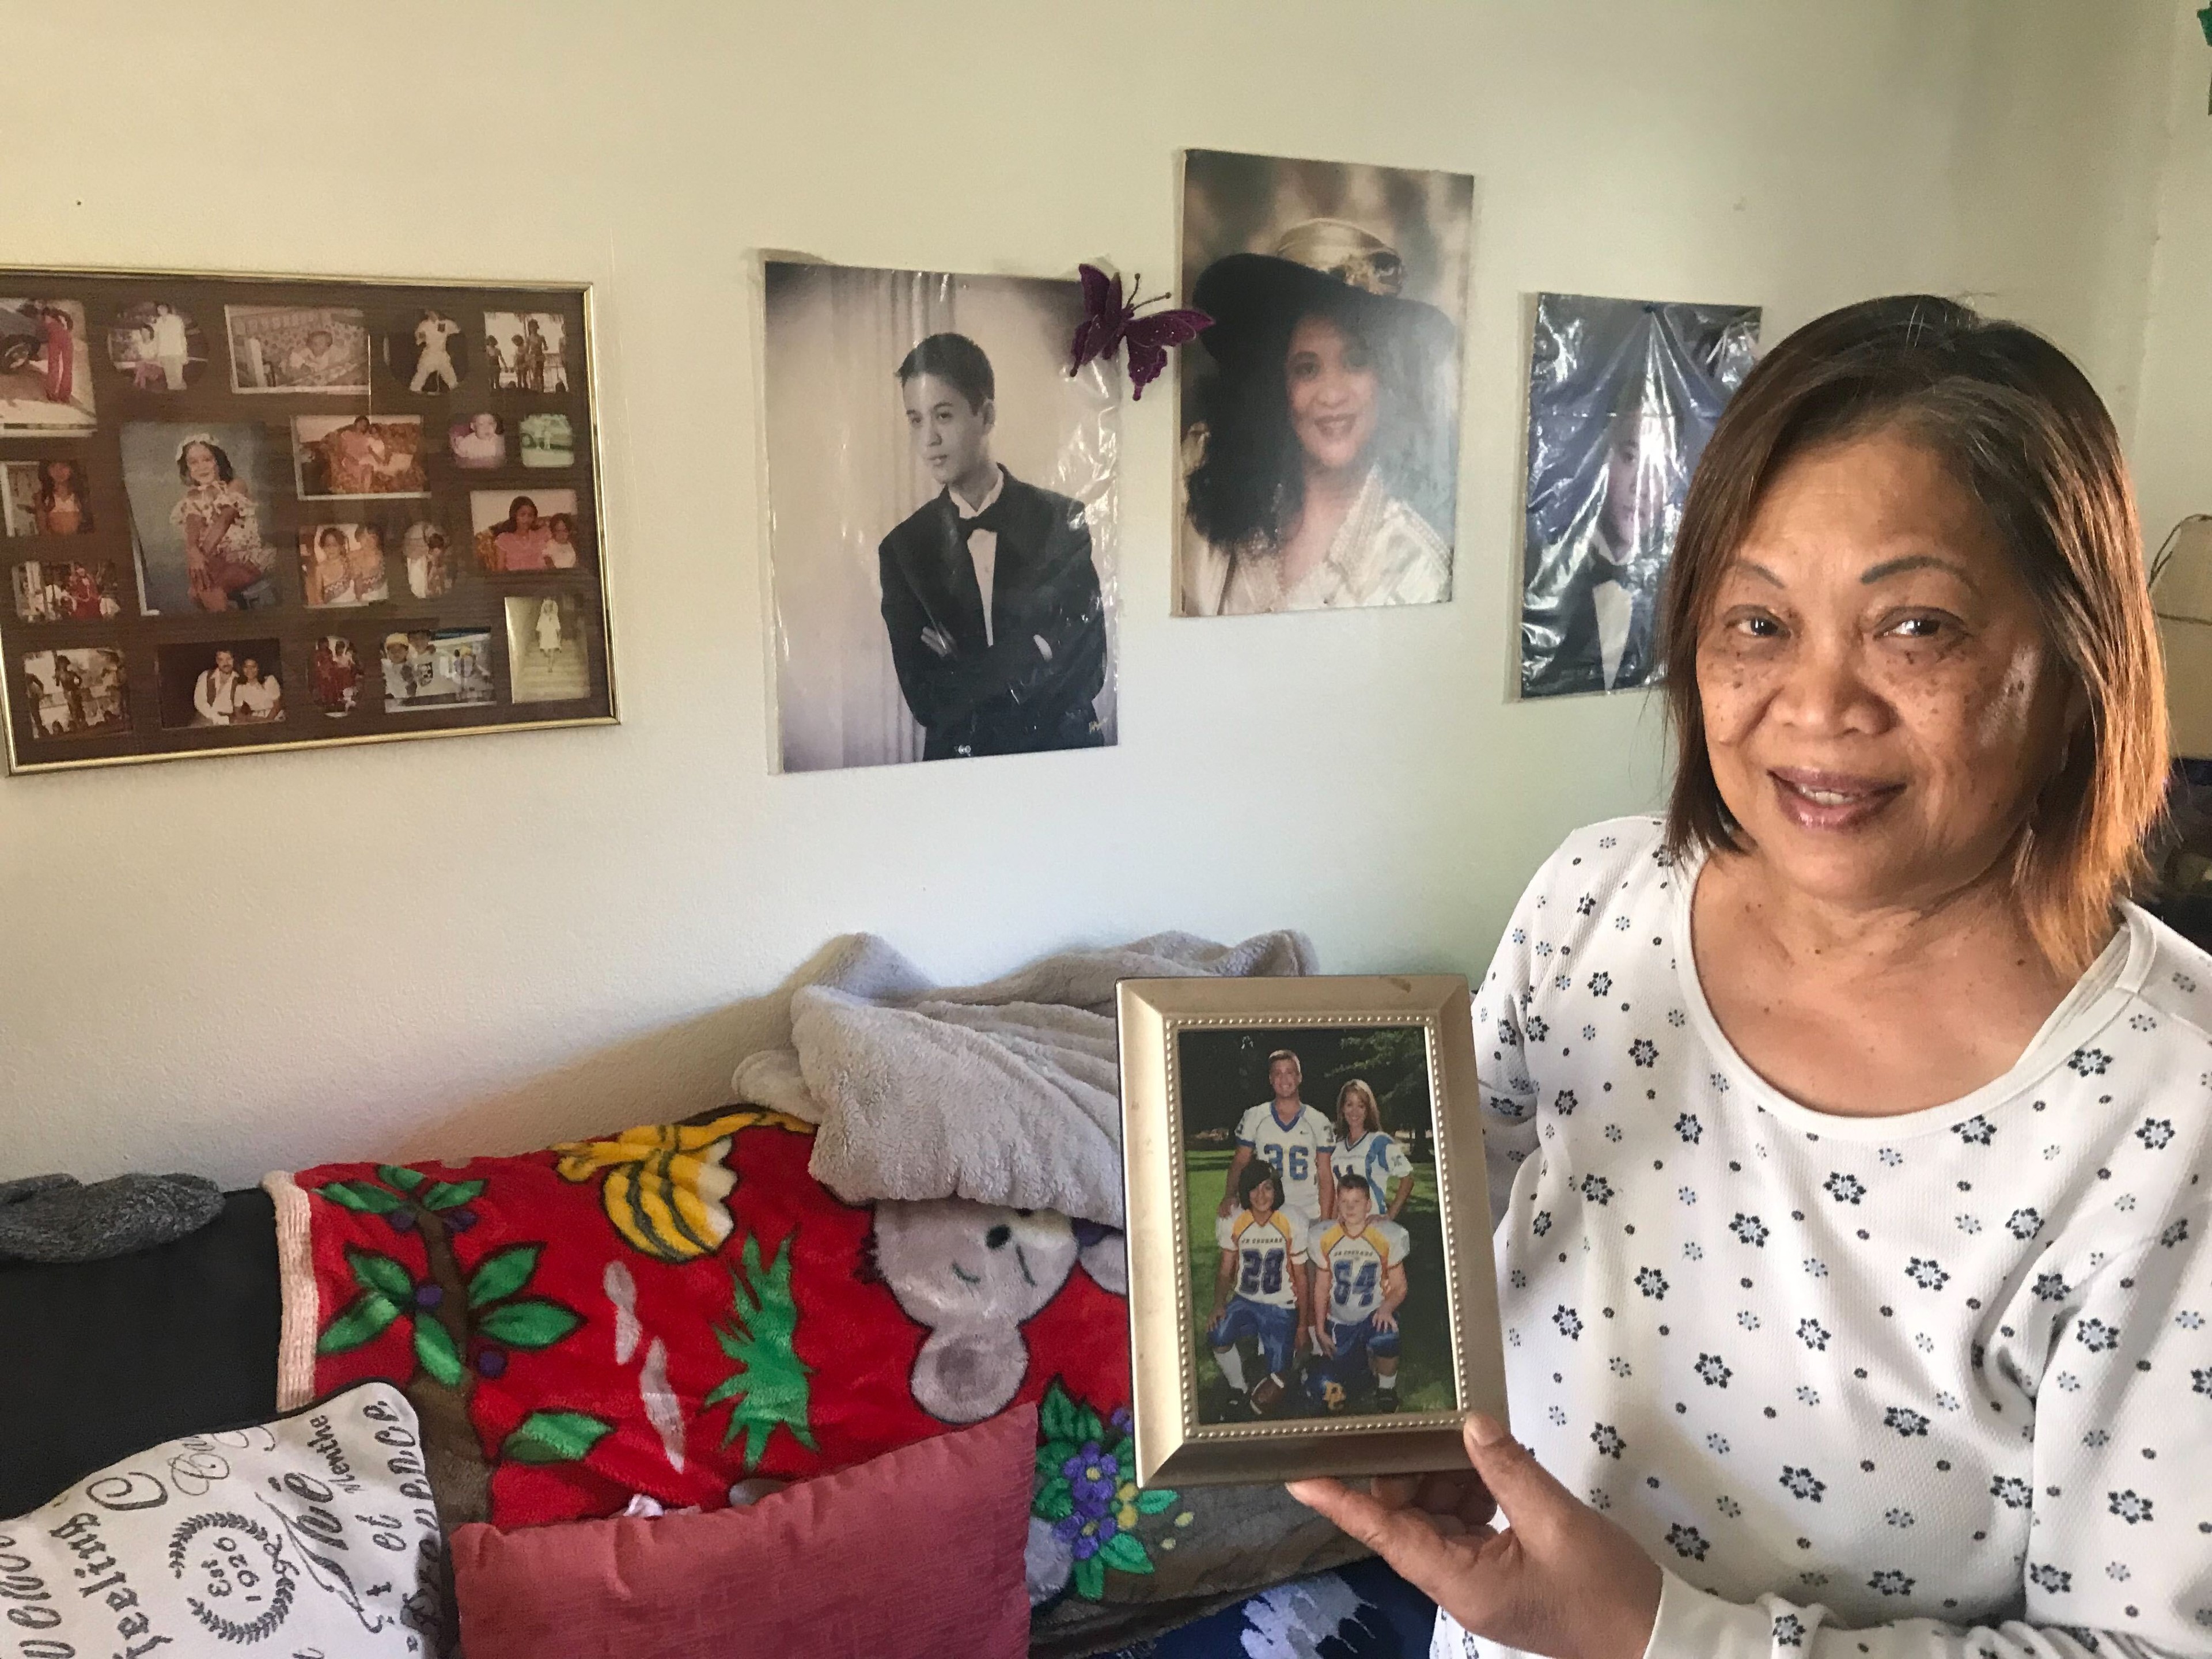 Sacramento faces an alarming shortage of senior affordable housing. Some new units are on the way